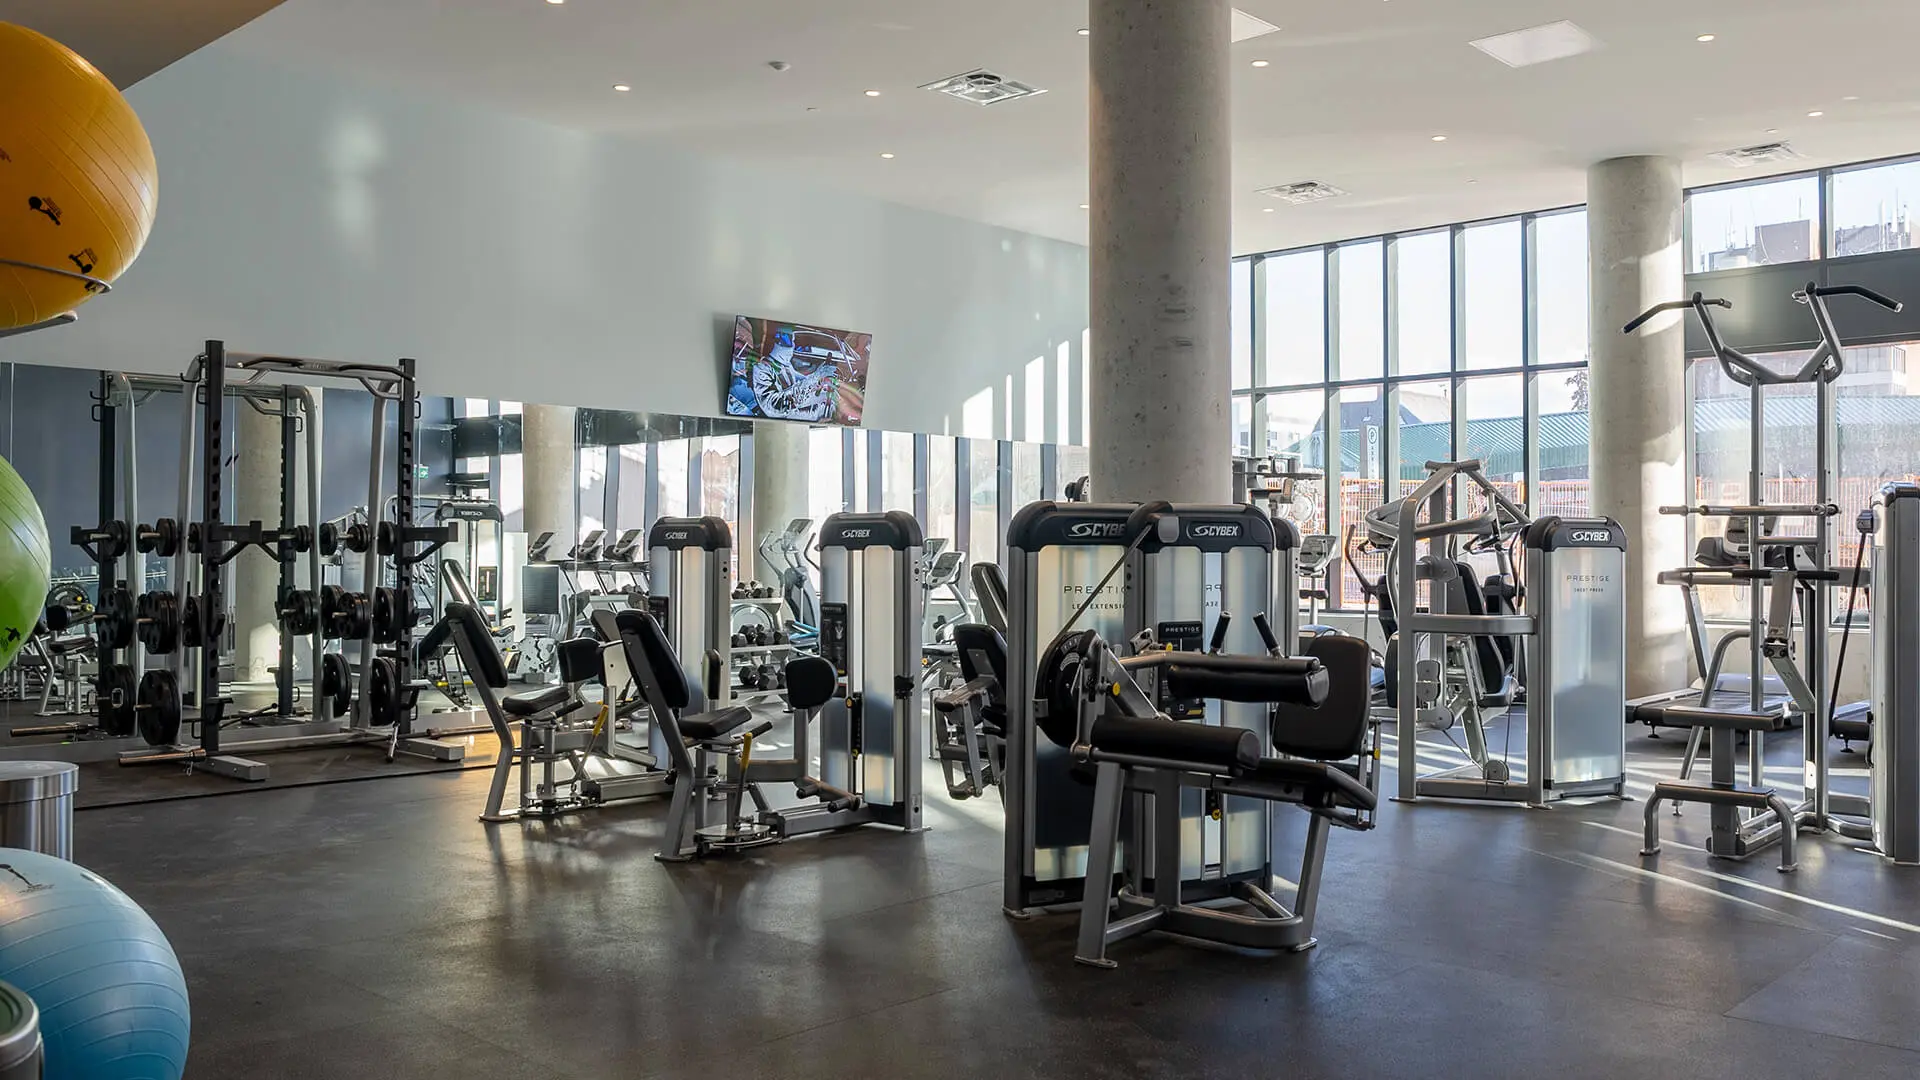 The Gym features all the gear you need to build and maintain the body you want.